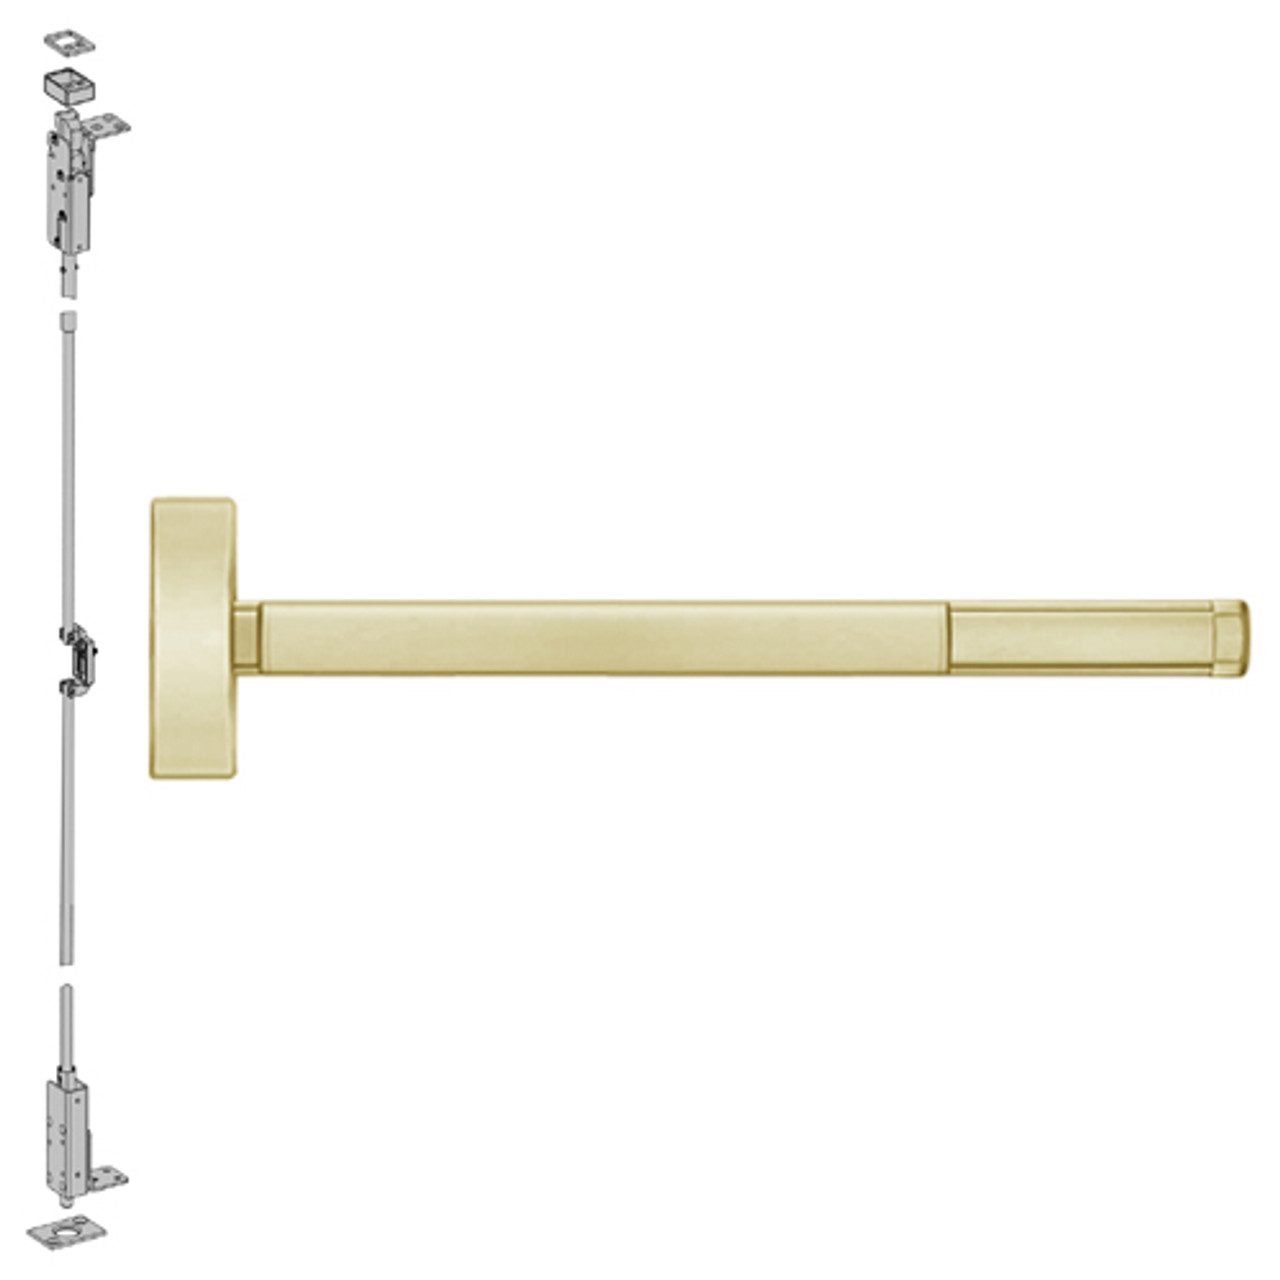 DEFL2701LBR-606-36 PHI 2700 Series Fire Rated Wood Door Concealed Vertical Exit Device with Delayed Egress Prepped for Cover Plate in Satin Brass Finish